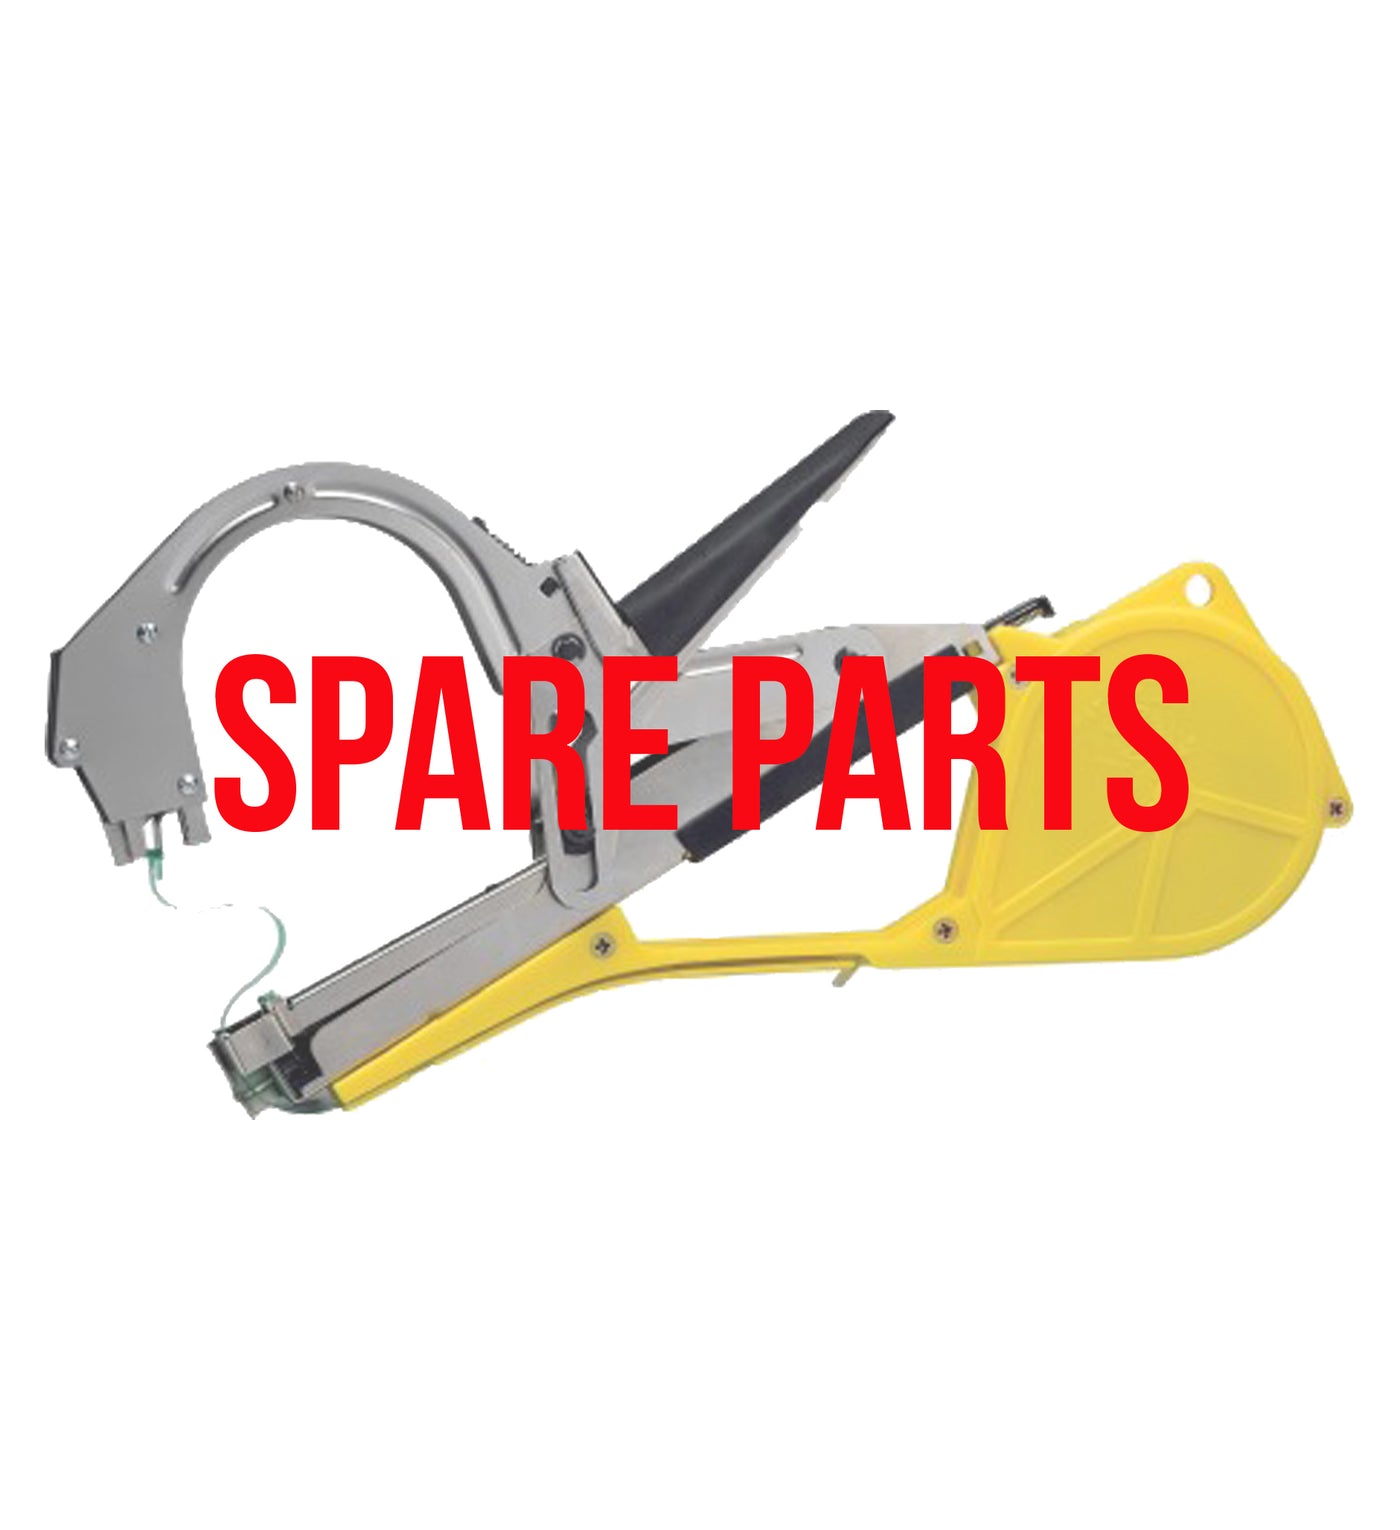 SPARE PARTS - TAPE TOOL SYSTEM